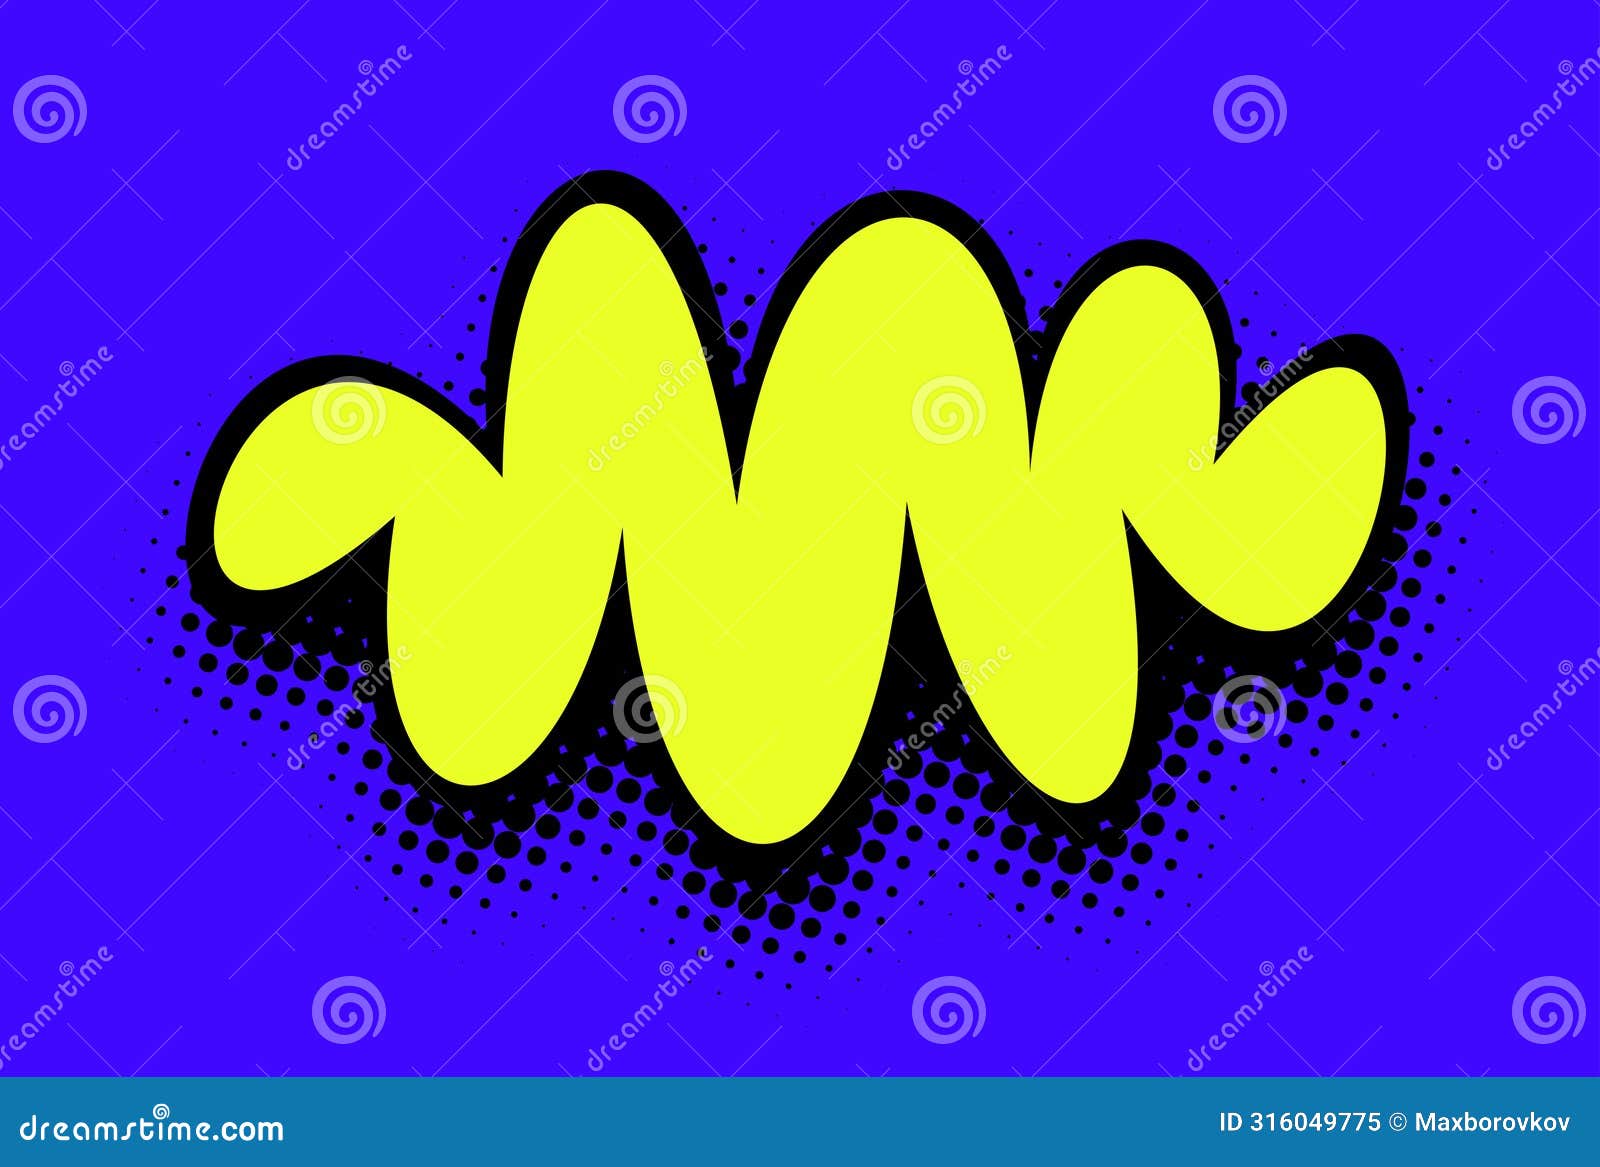 neon yellow waves on ultraviolet